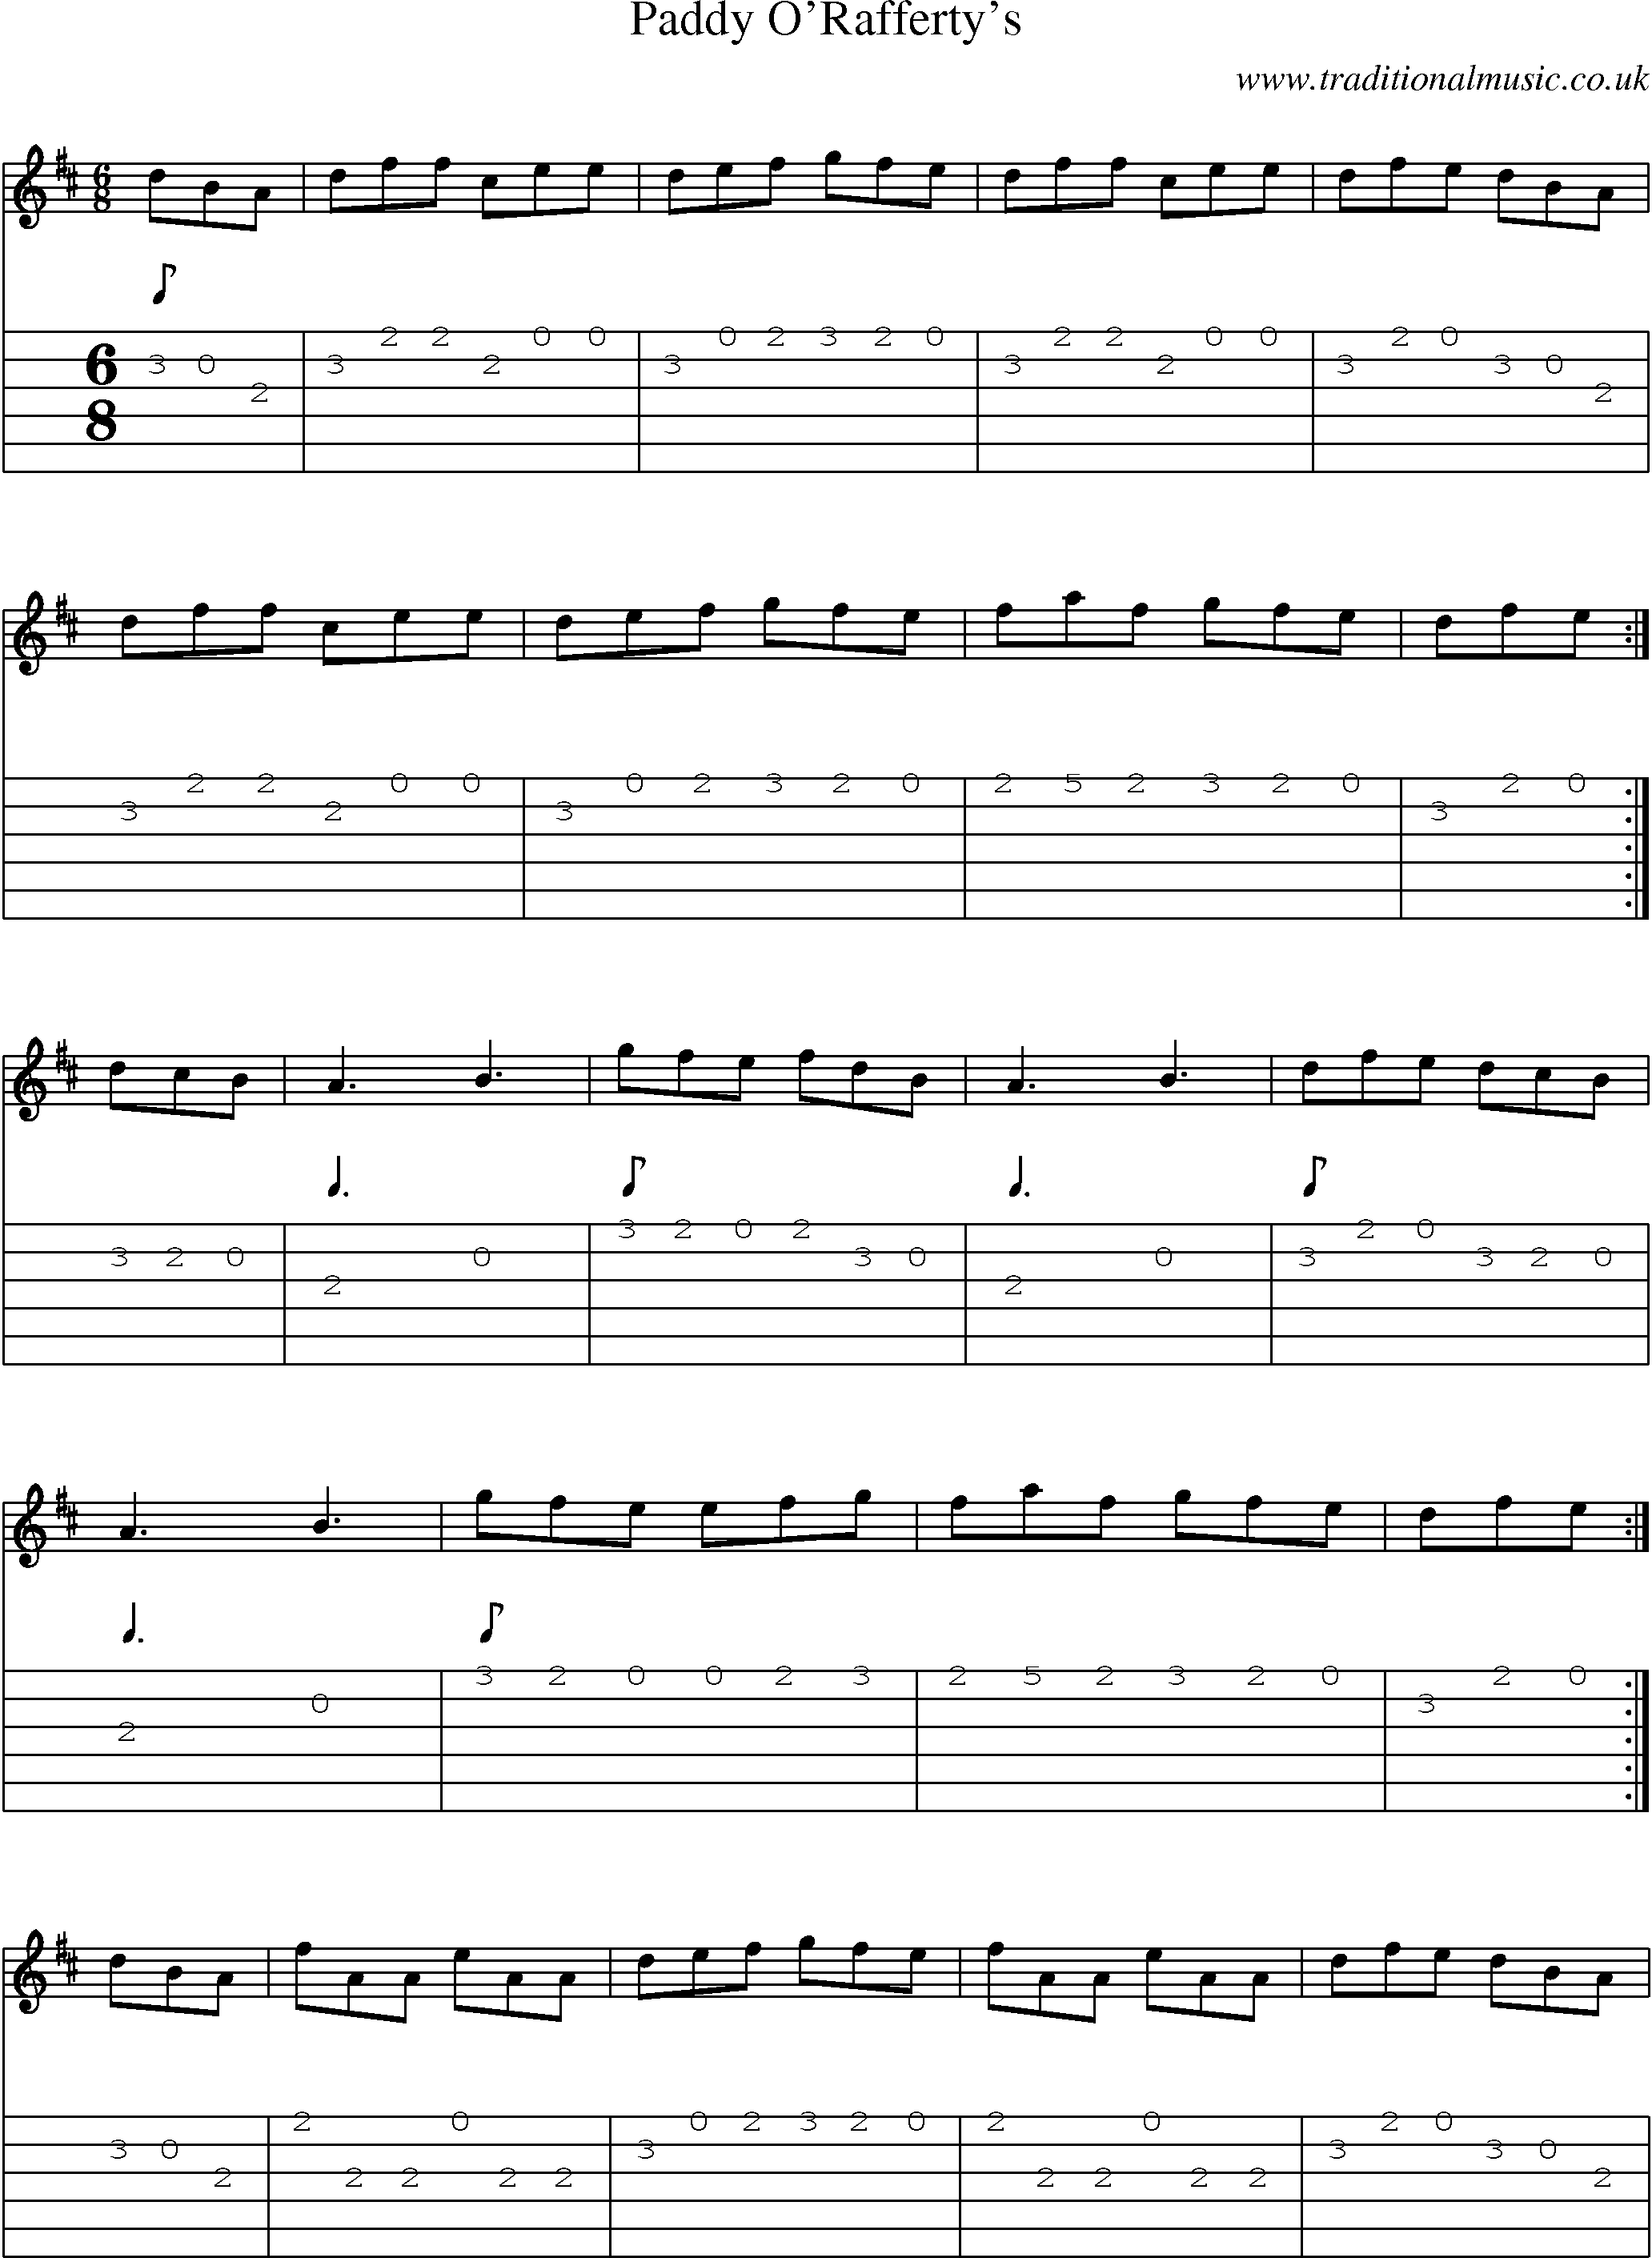 Music Score and Guitar Tabs for Paddy Oraffertys